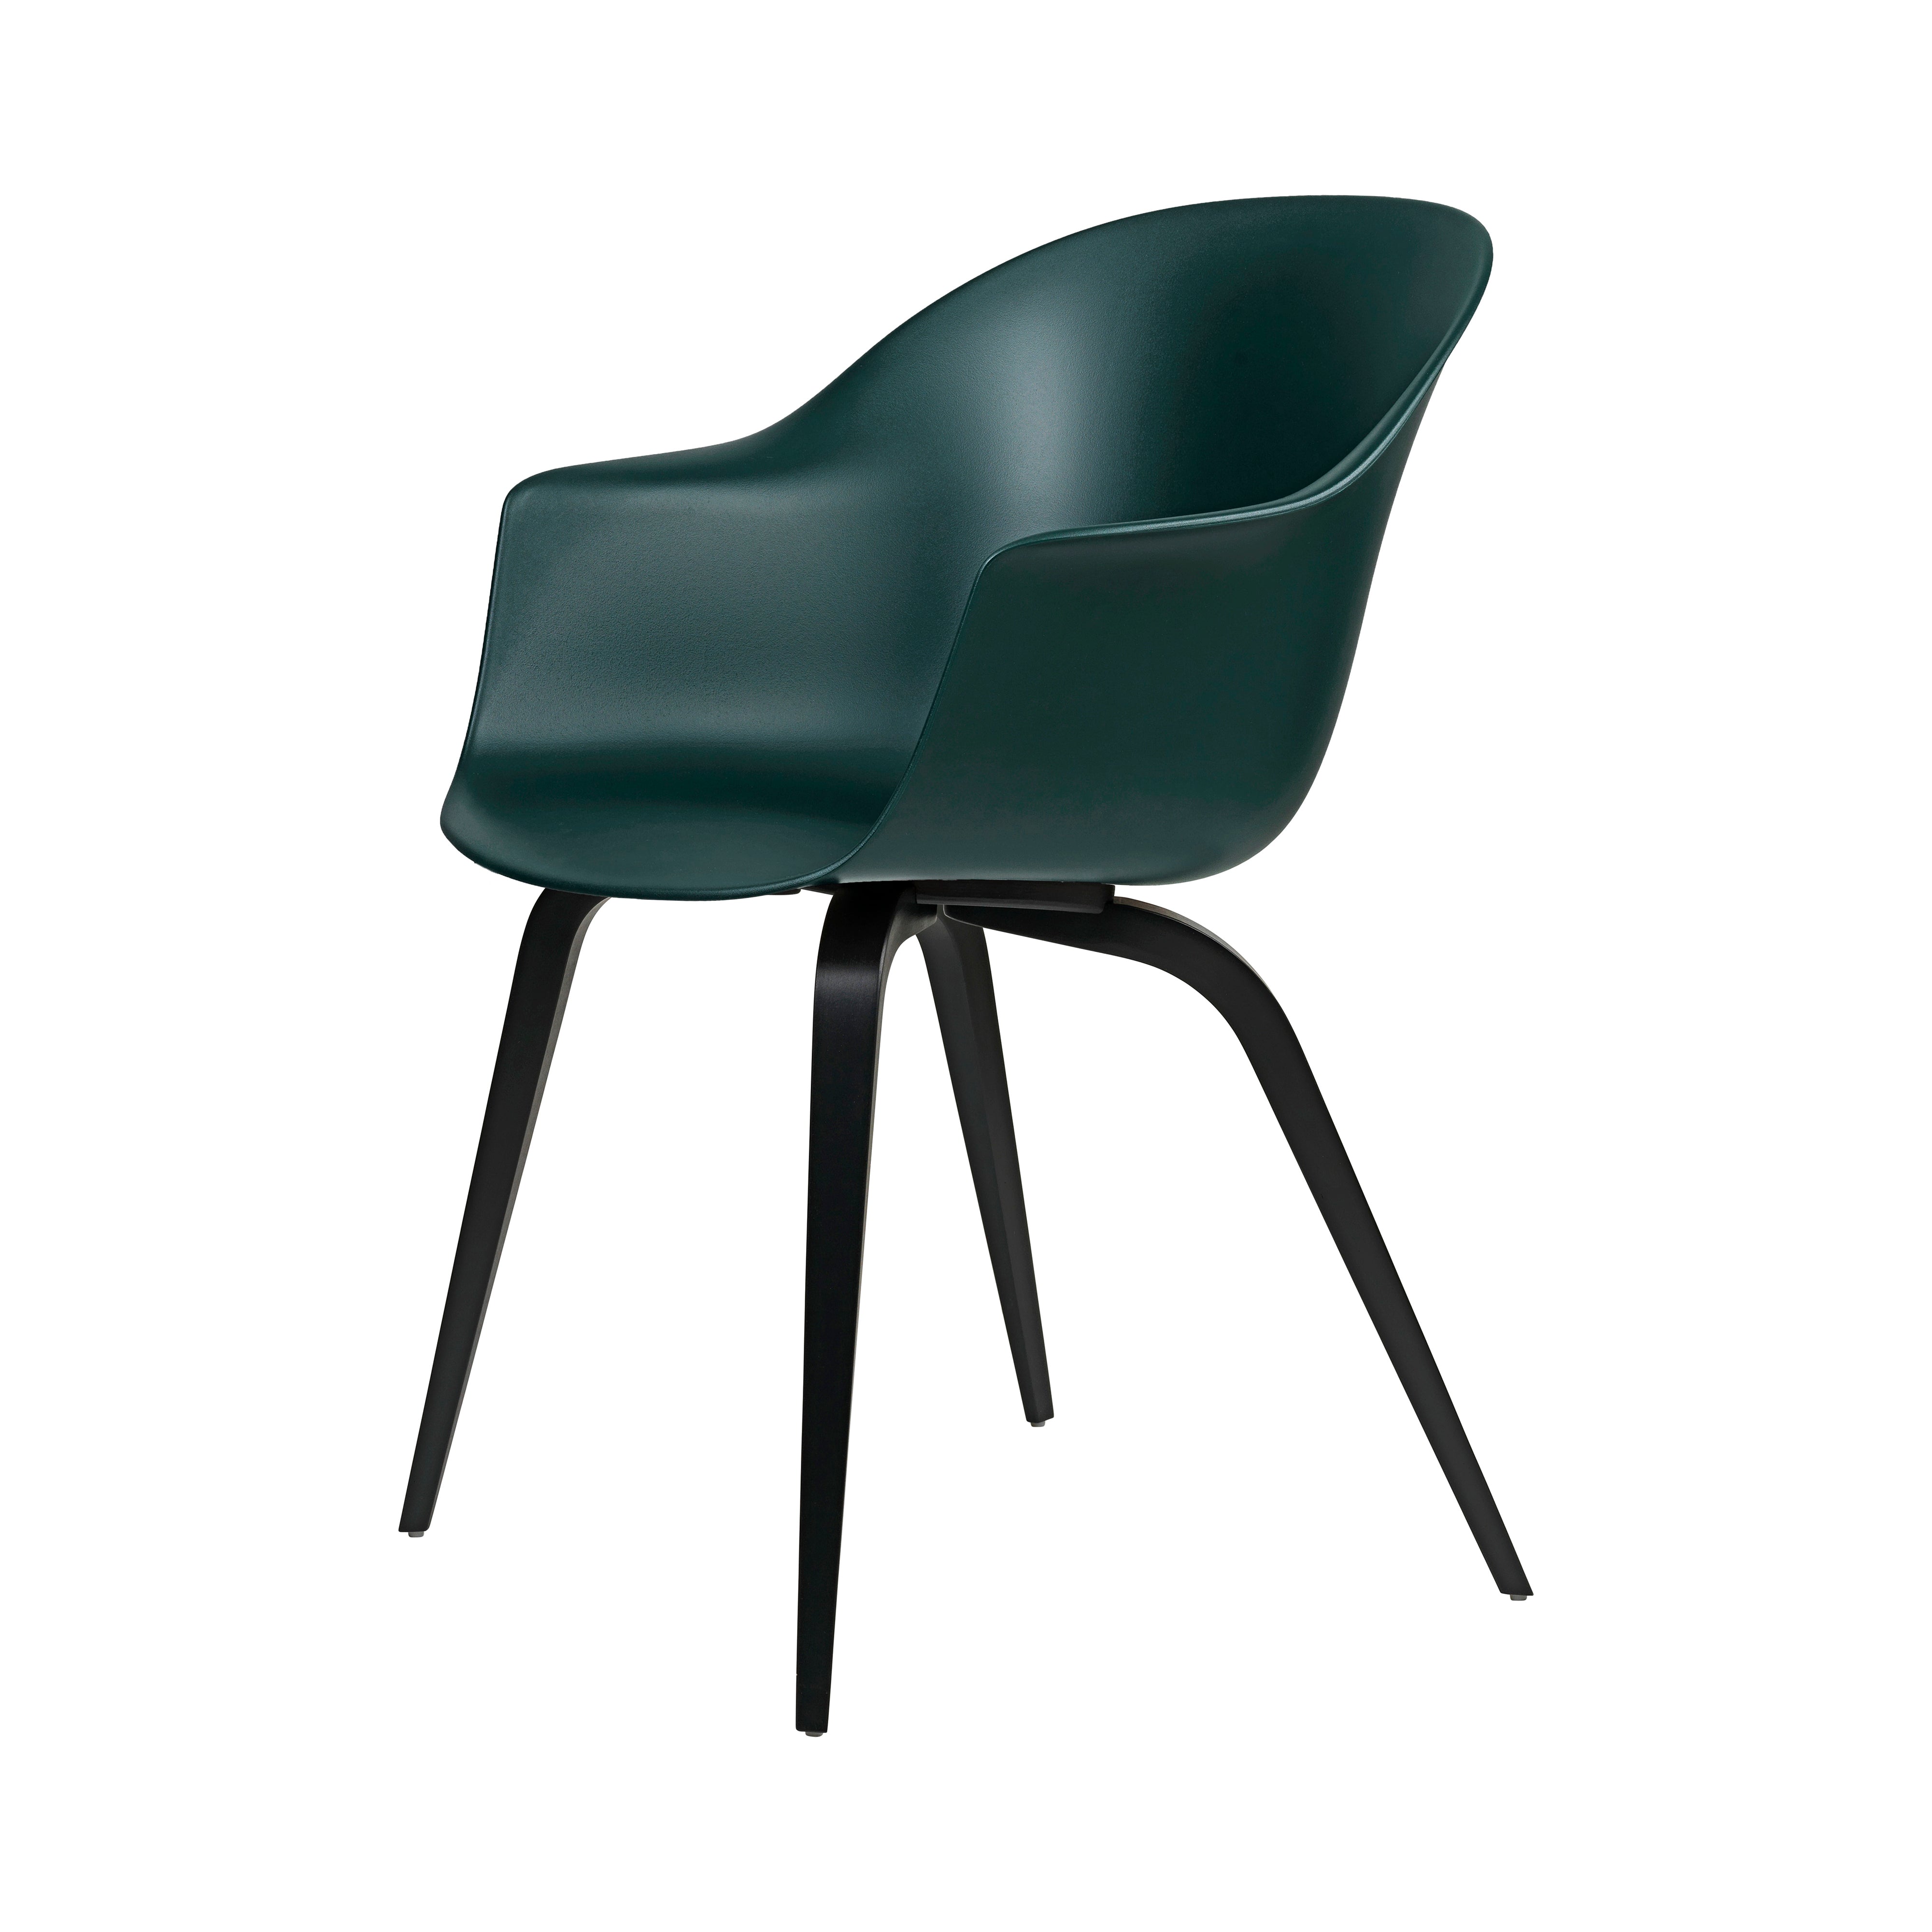 Bat Dining Chair: Wood Base + Black Stained Beech + Dark Green + Plastic Glides